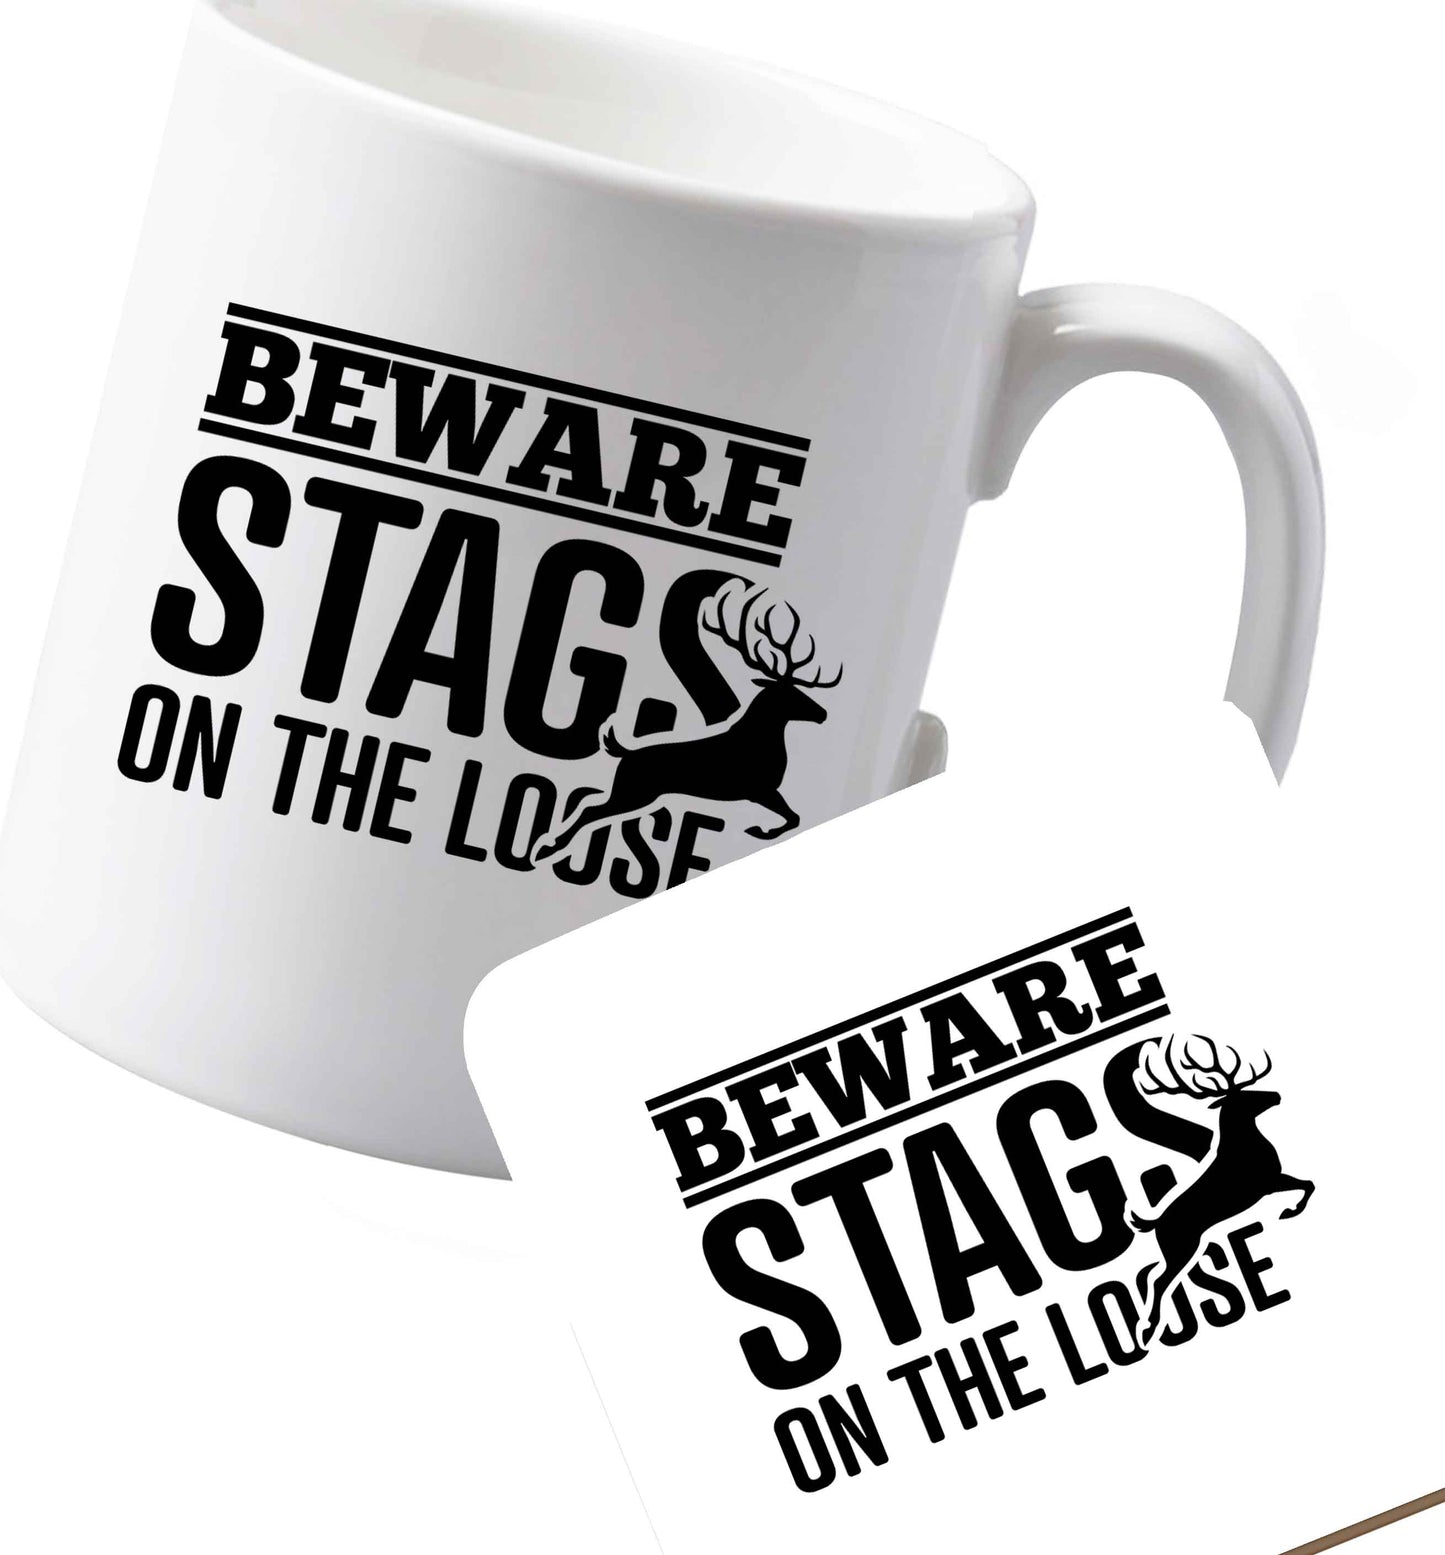 10 oz Ceramic mug and coaster Beware stags on the loose   both sides